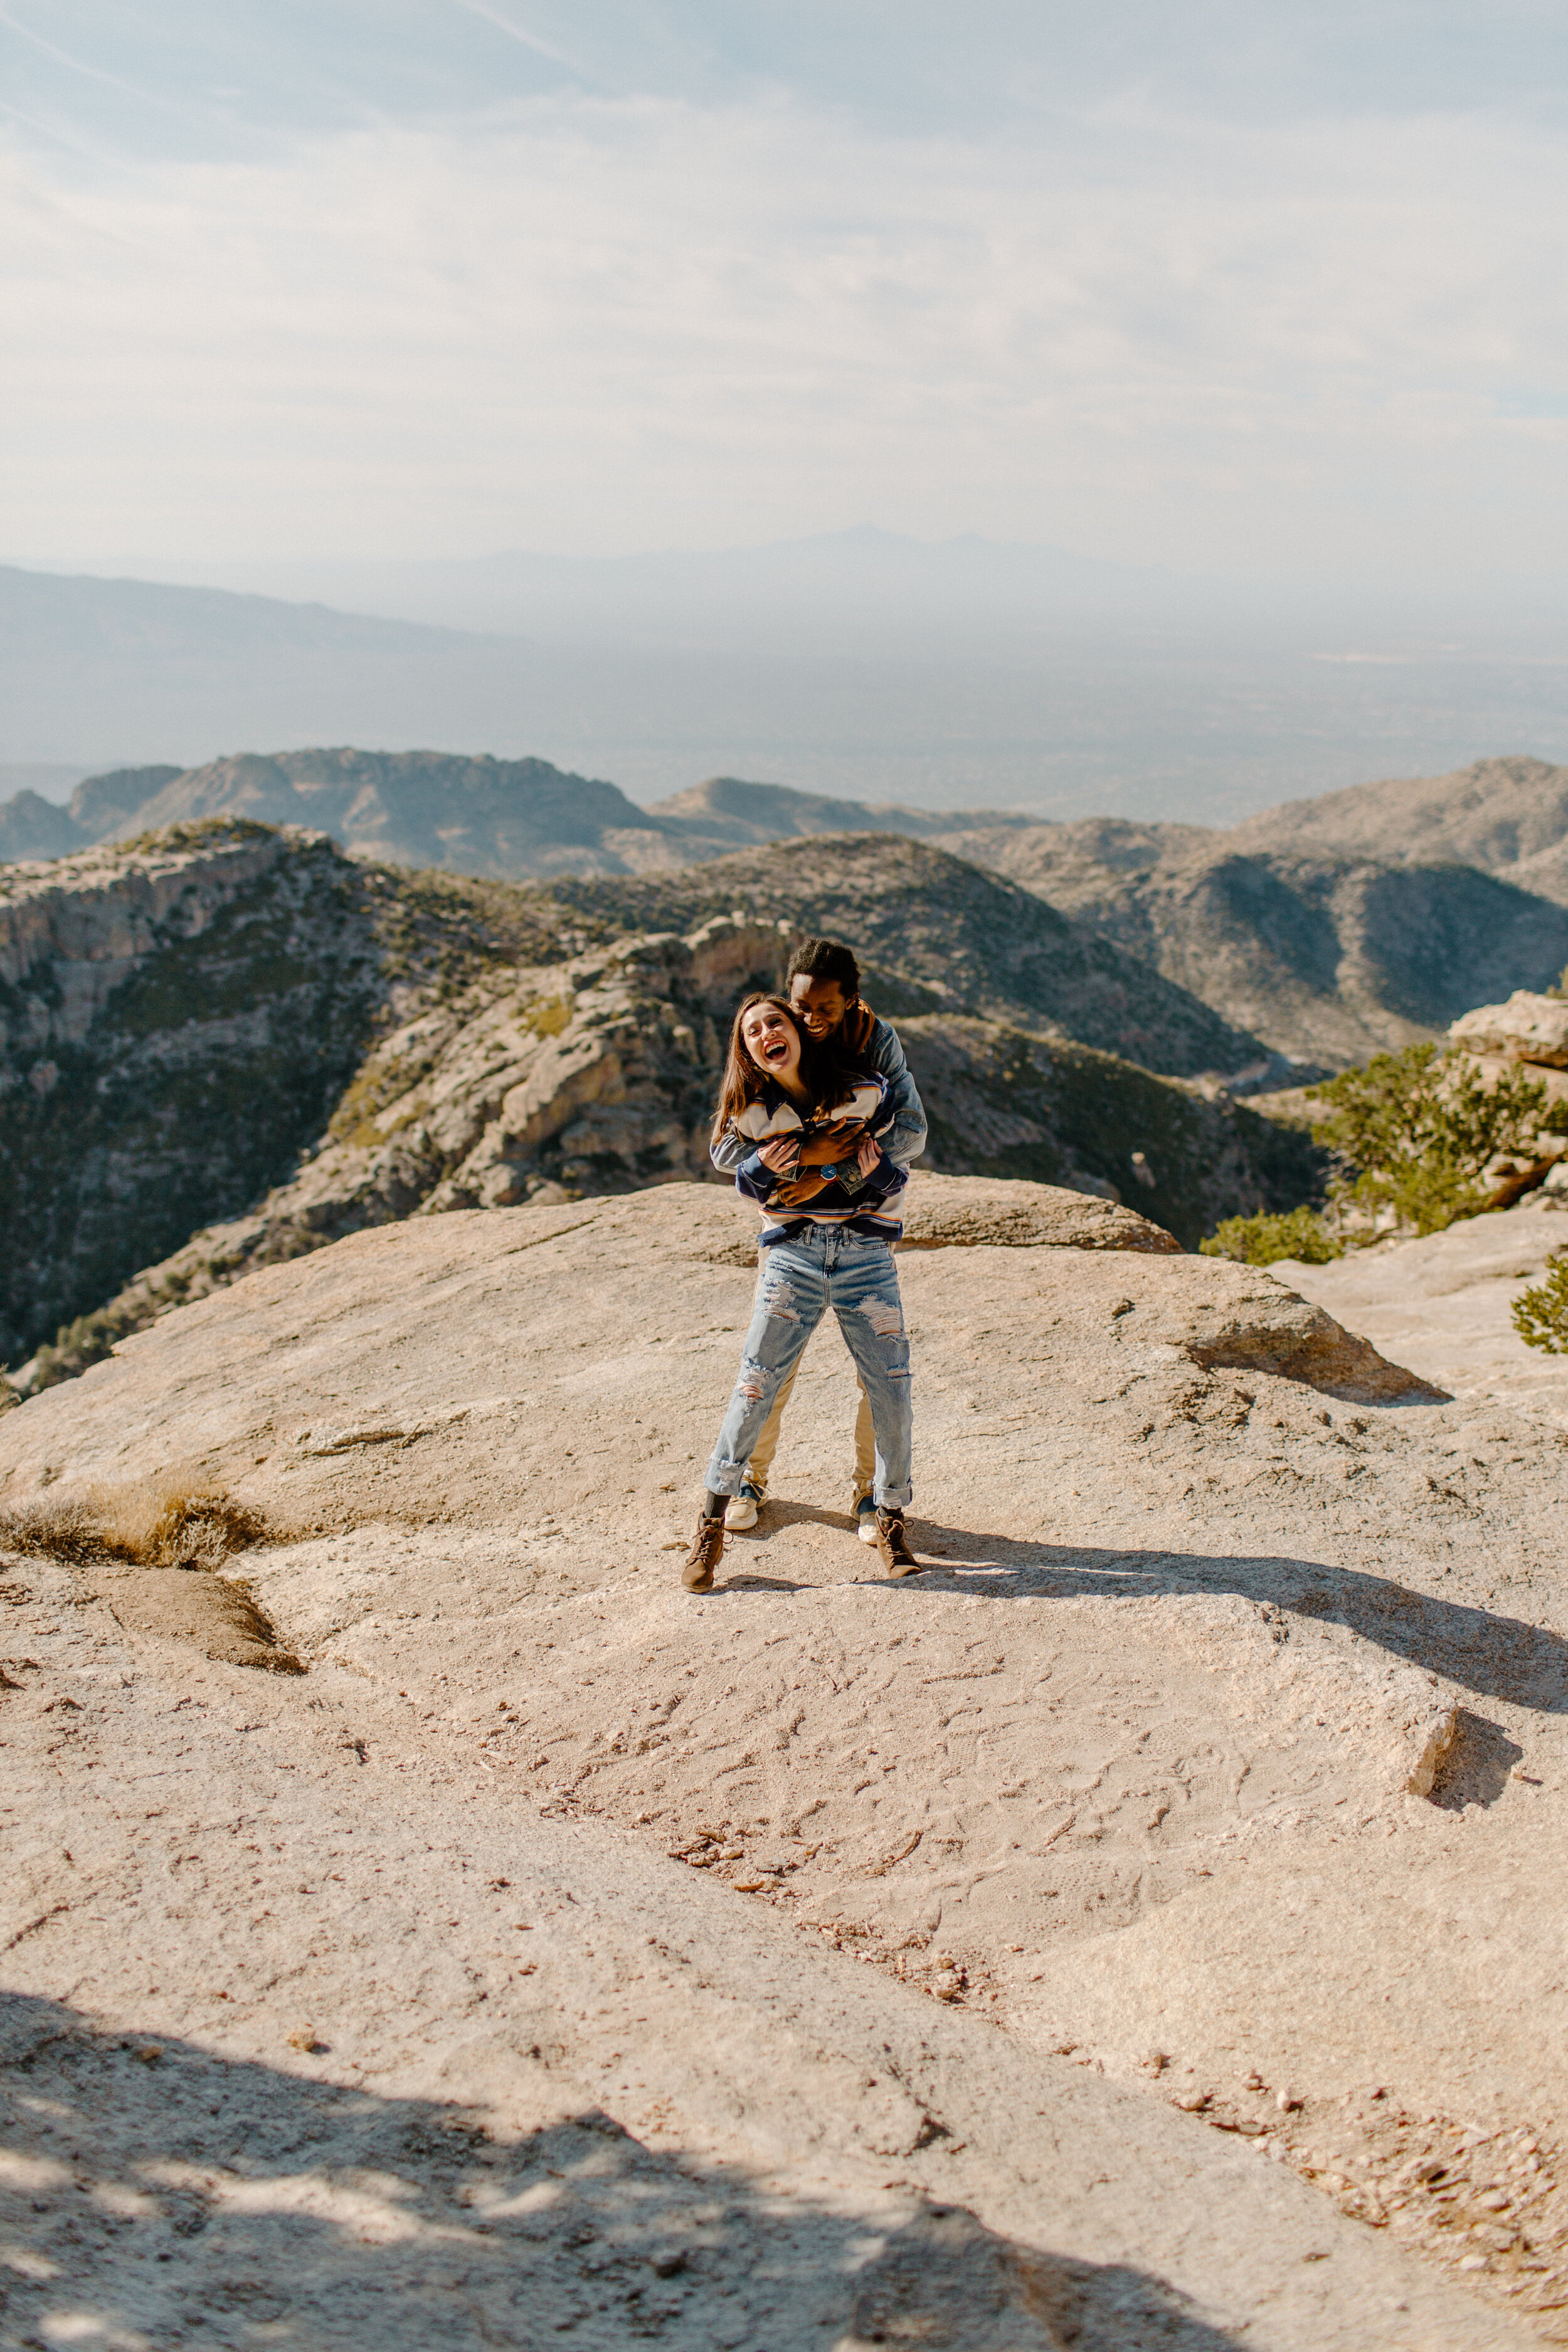  Boyfriend stands behind his girlfriend and holds her while they both laugh at Windy Point on Mount Lemmon in Tucson Arizona. View of mountains in the back. Arizona couples photographer, Lucy B. Photography. 